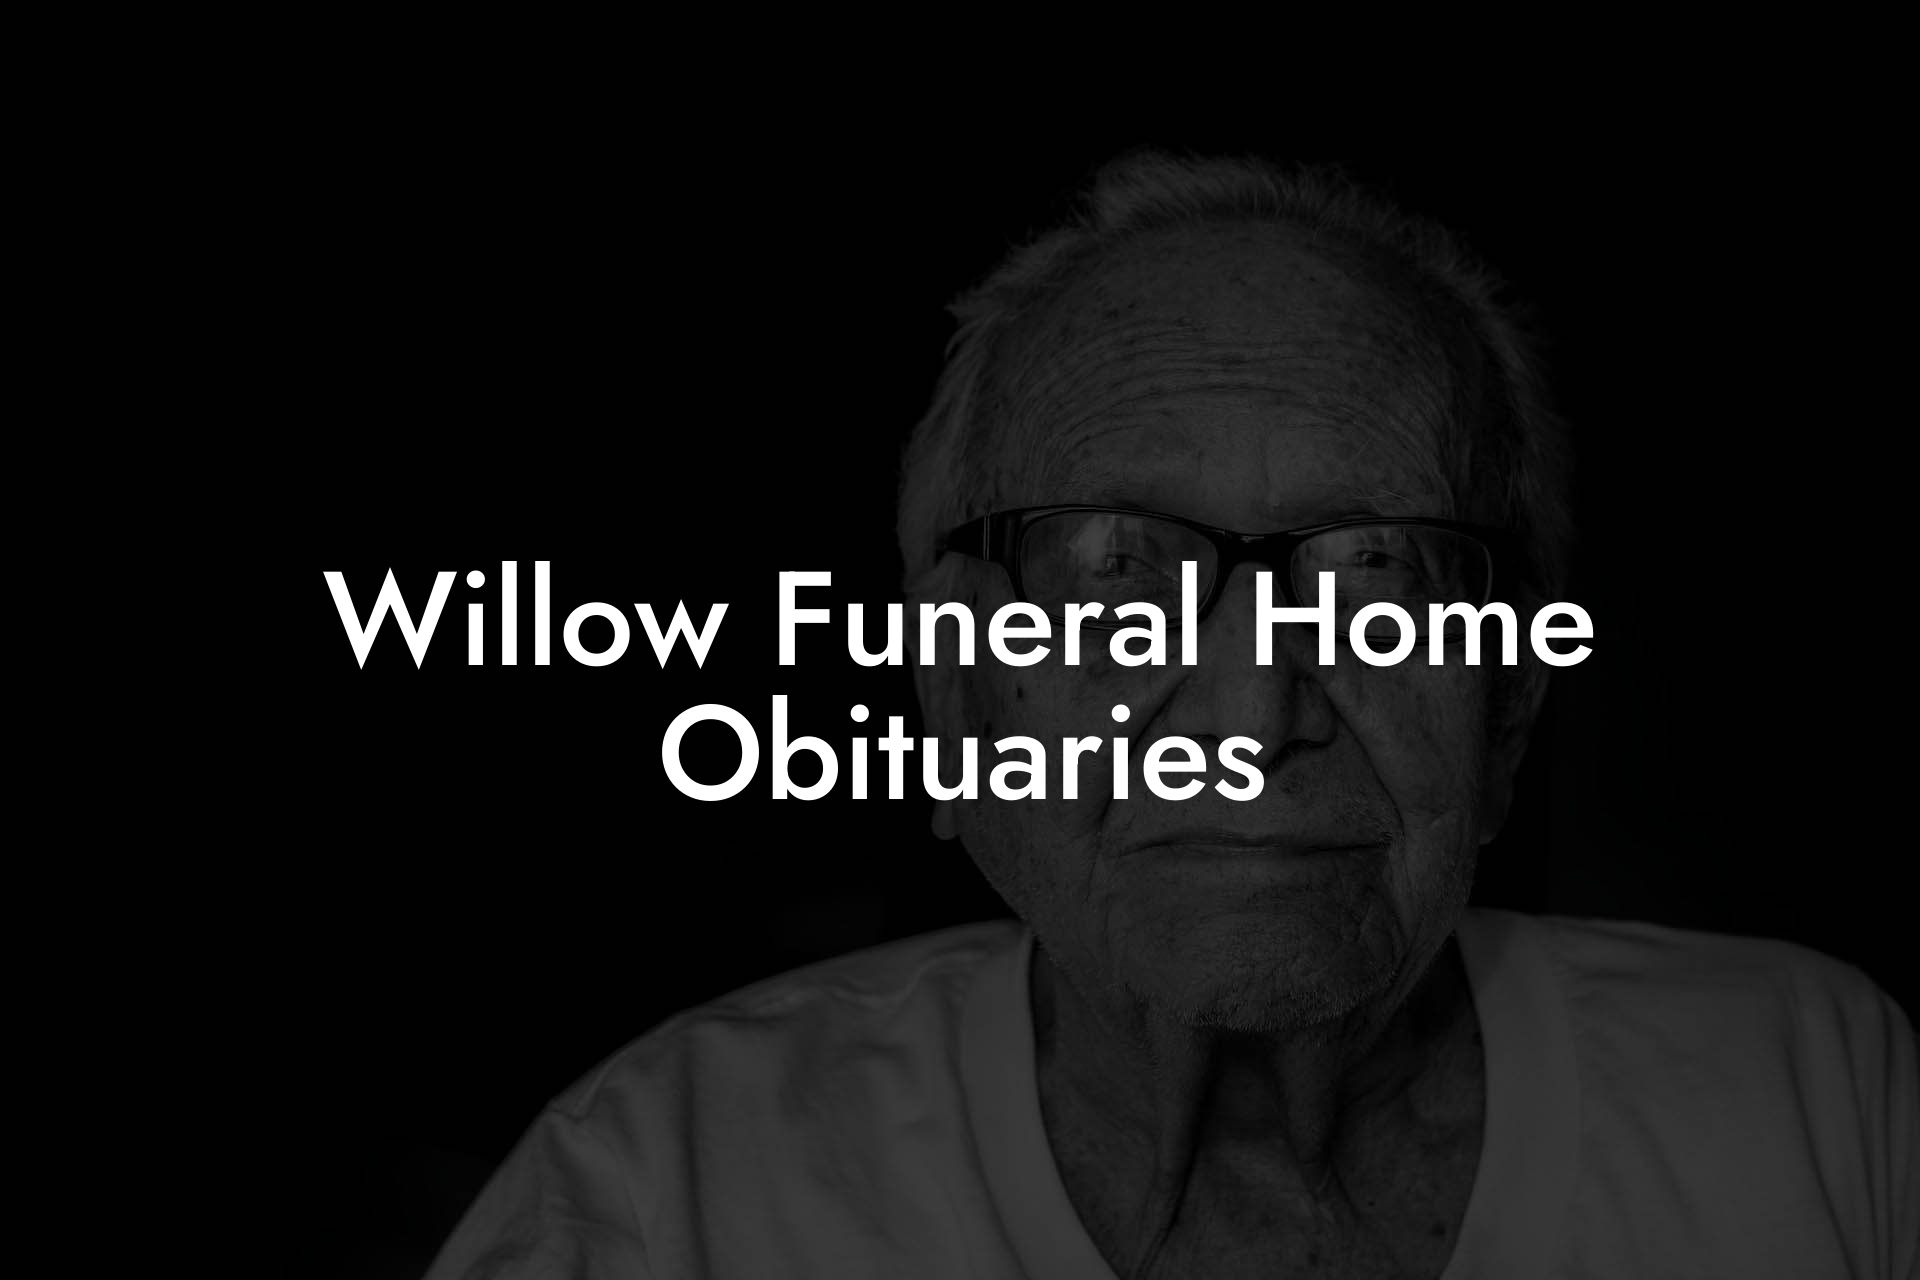 Willow Funeral Home Obituaries